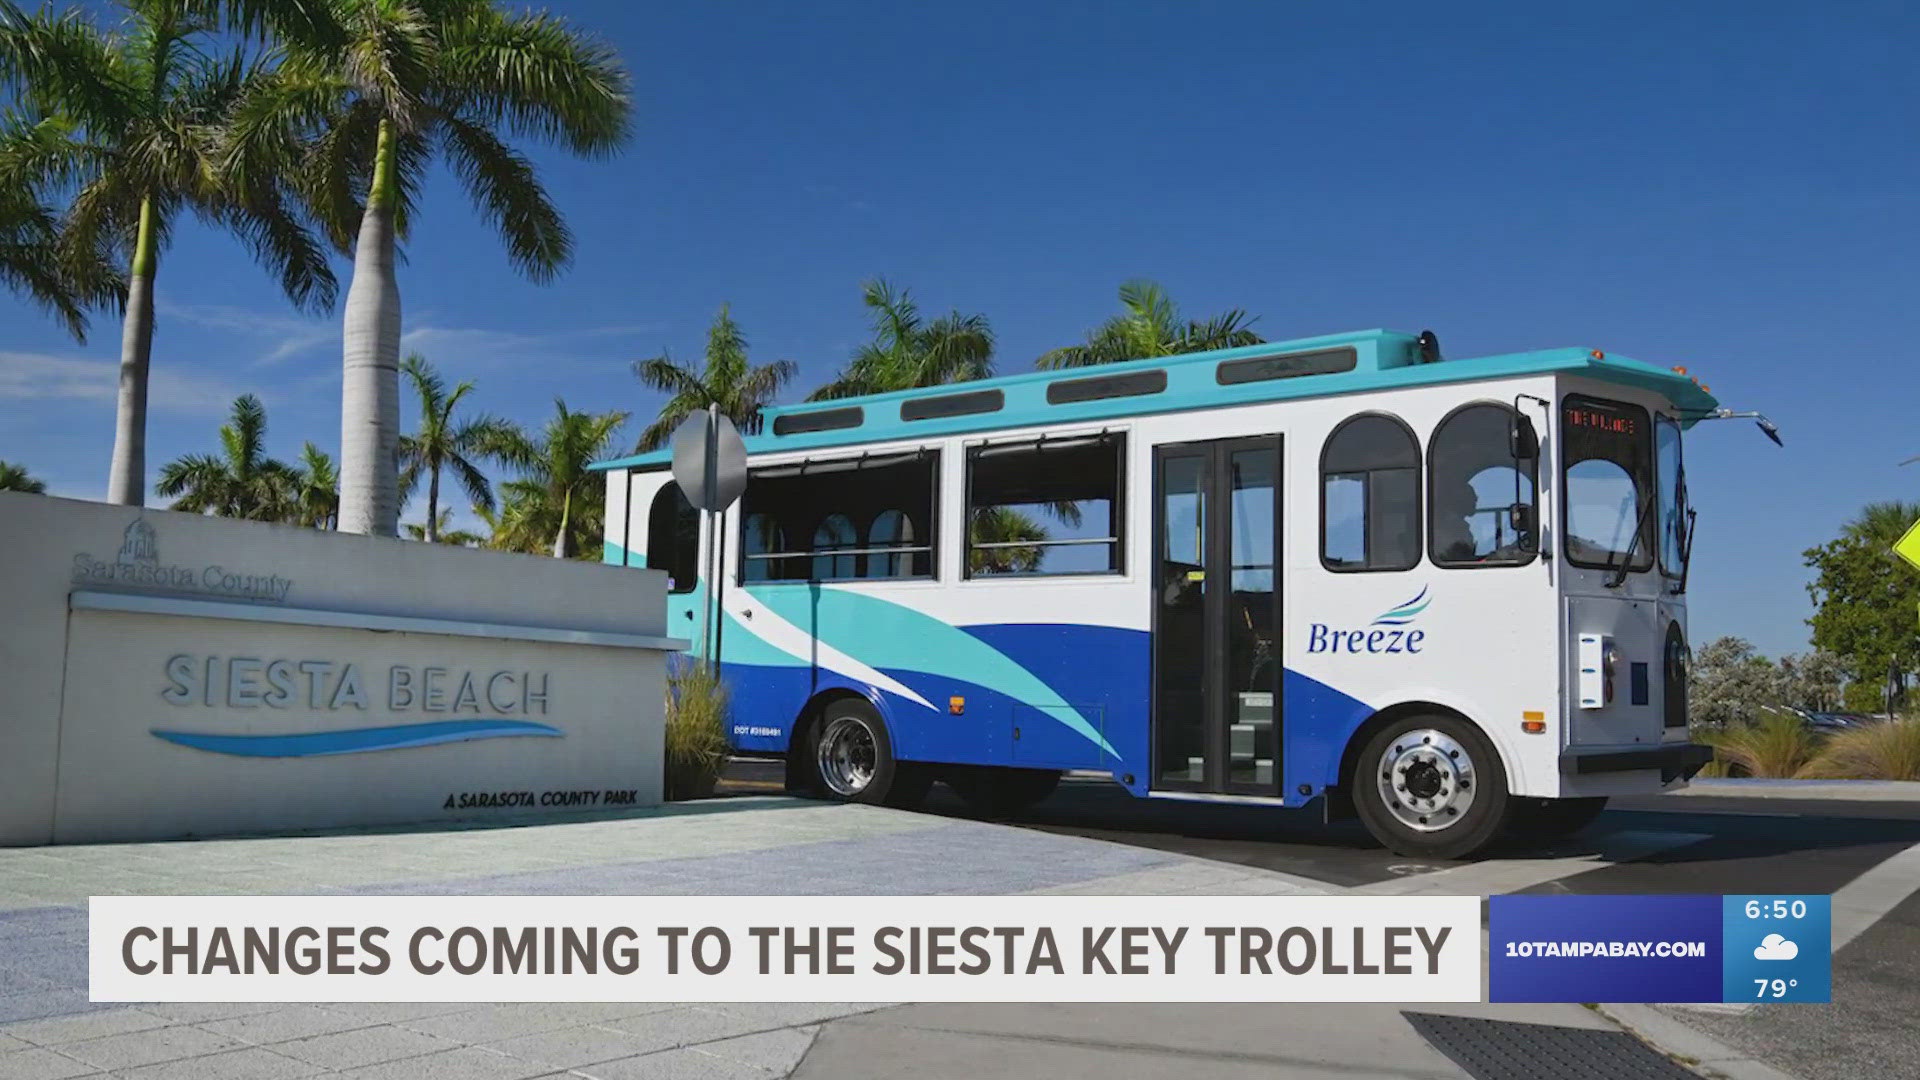 The Sarasota trolley will now be available on a rider app for people looking to get around for free.